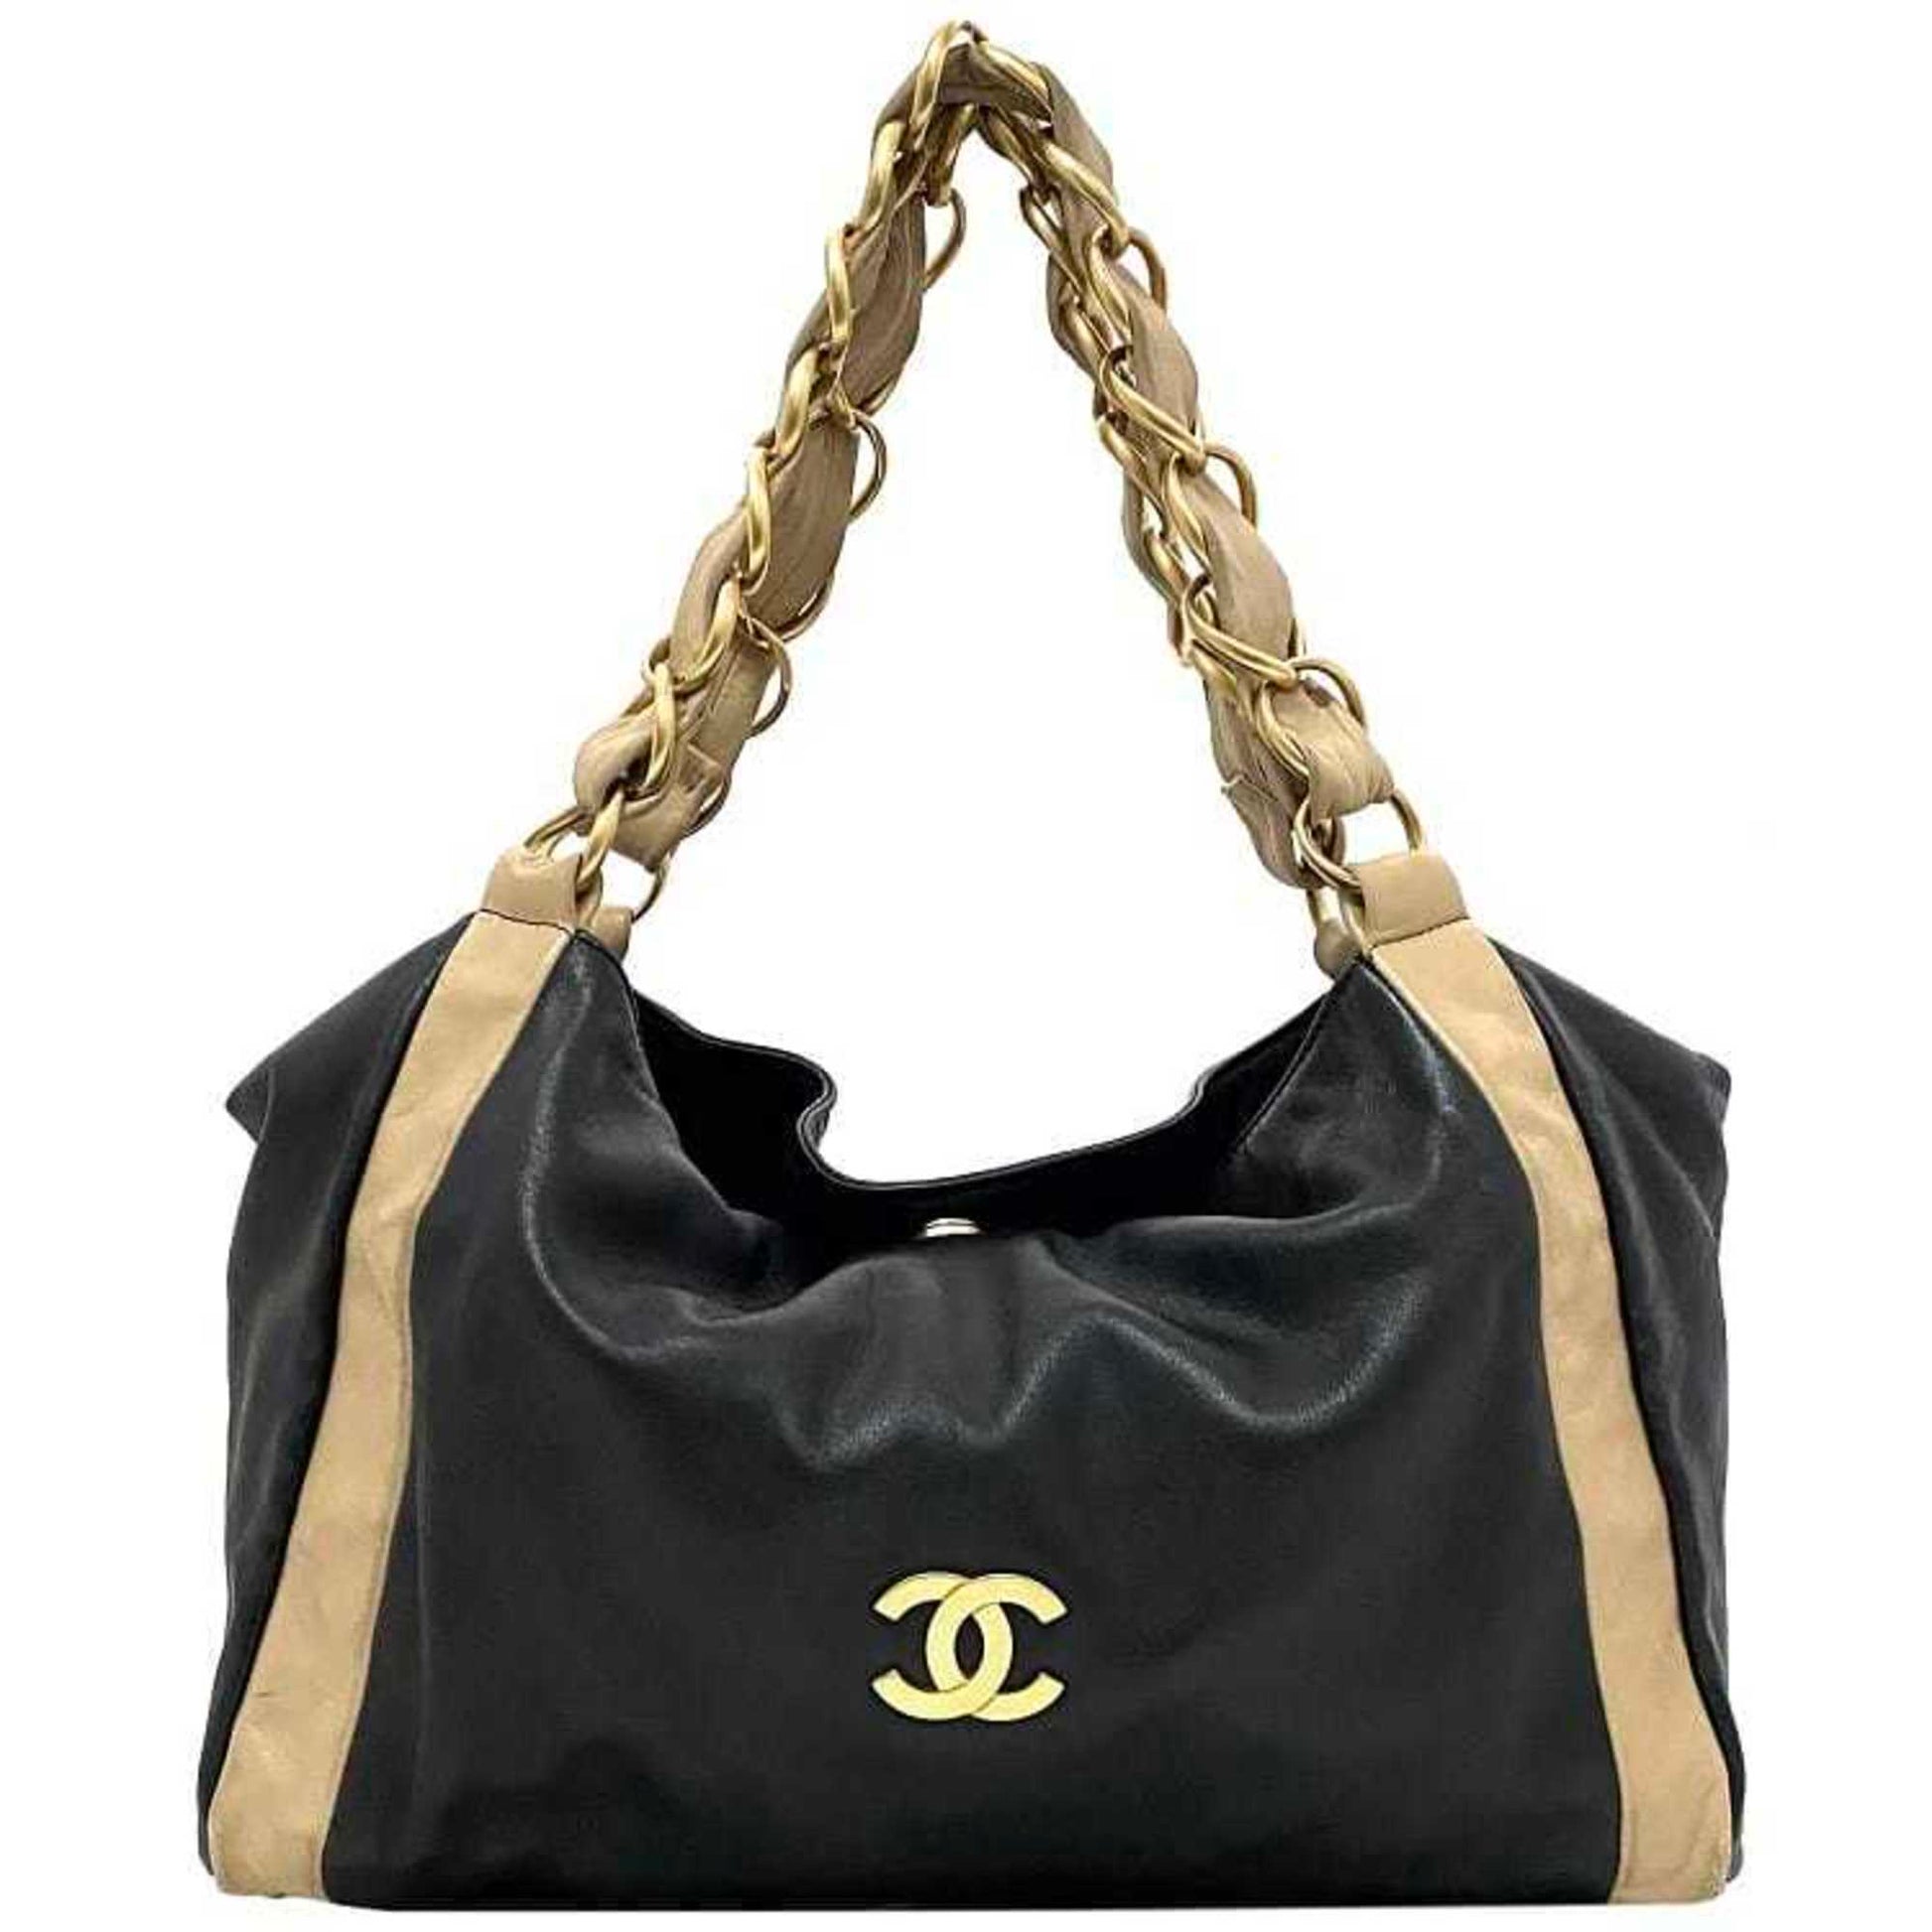 CHANEL Chain Tote Bag Black Beige Gold Cocomark Leather Lambskin 7th B